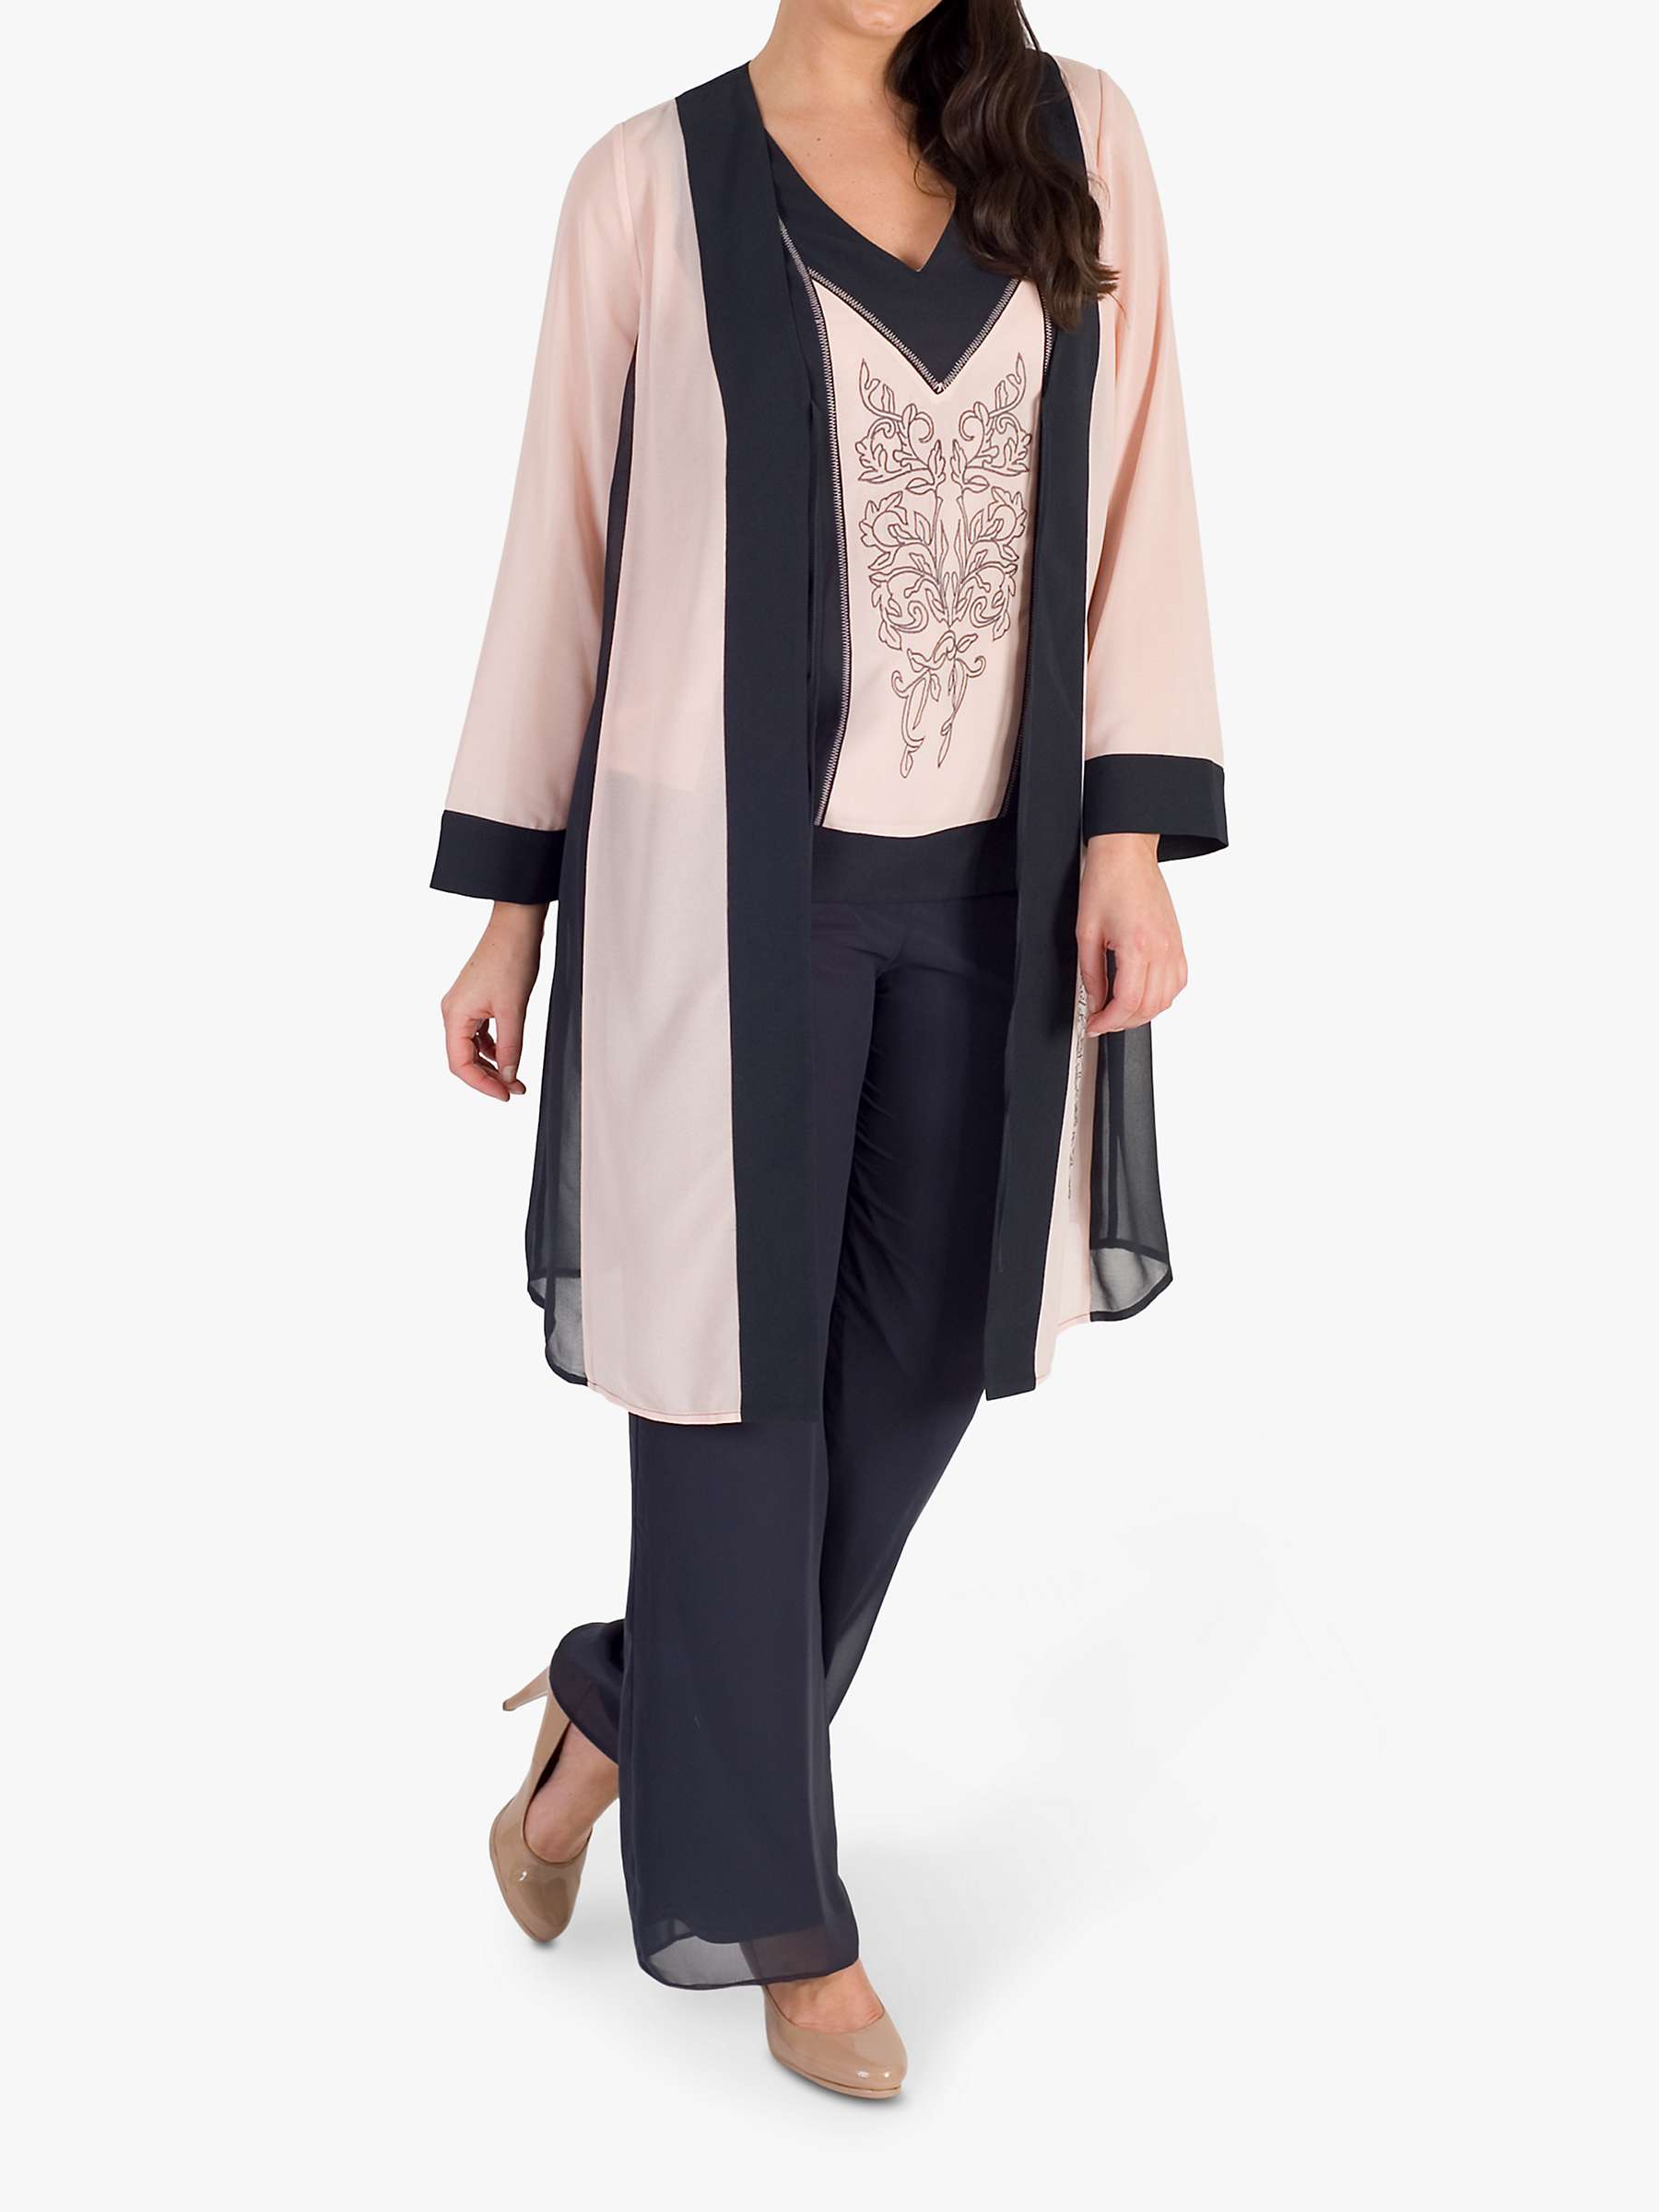 Buy Chesca Contrast Trim Embroidered Chiffon Coat, Smoke/Shell Online at johnlewis.com